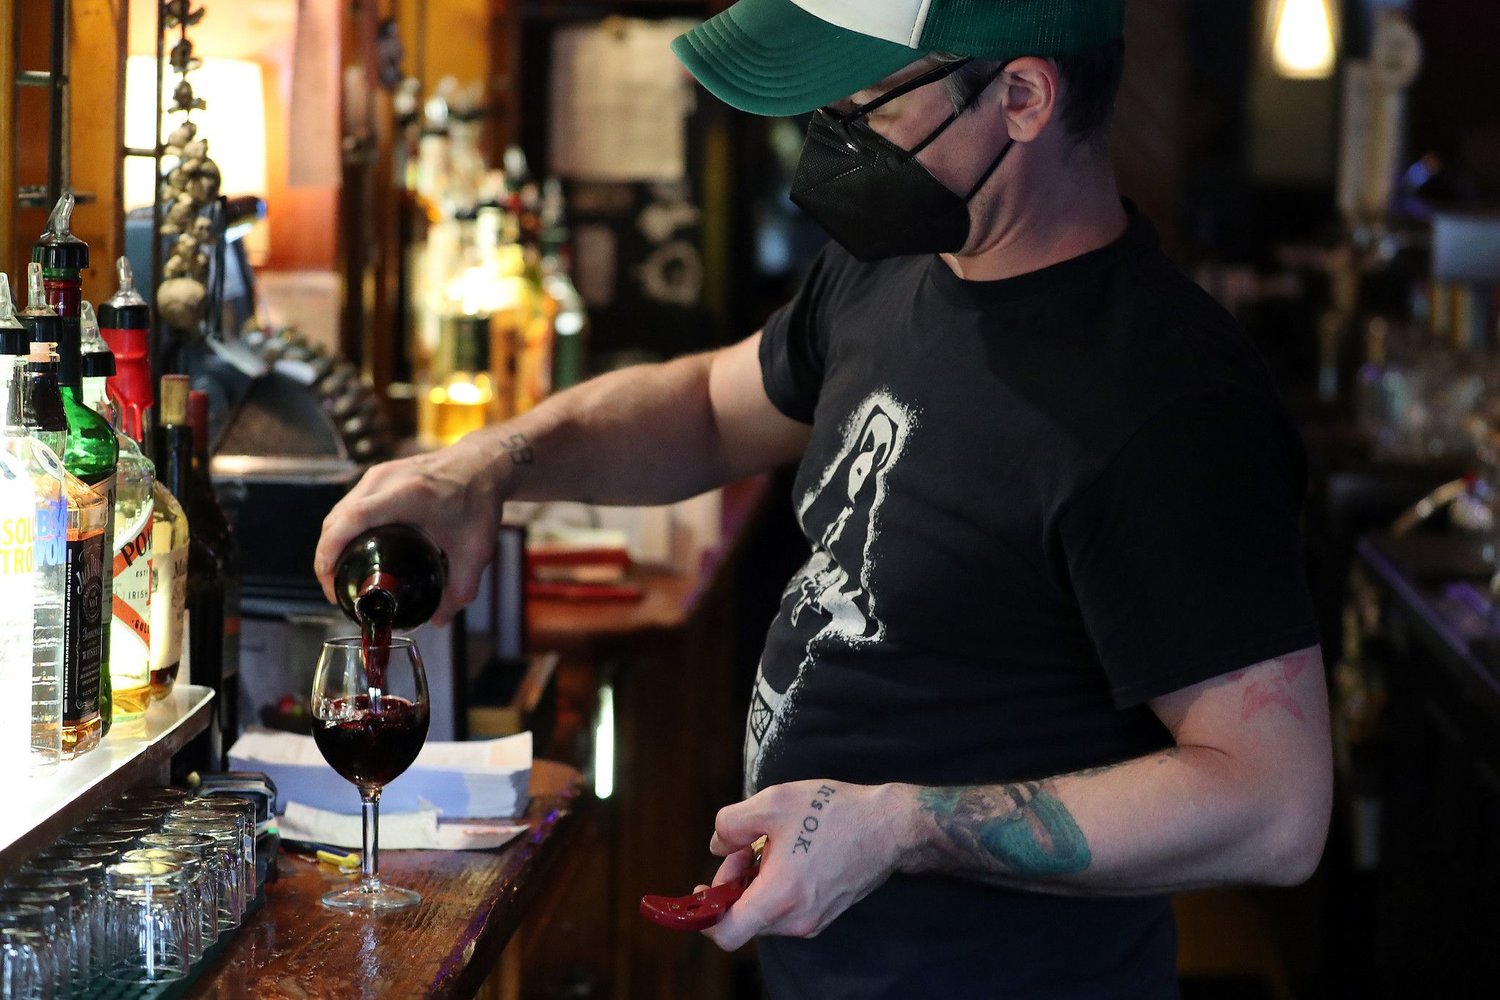 Jon Acosta pours a glass of wine for a customer at Four Moon Tavern in Chicago on July 29, 2021. After a positive COVID-19 test amongst its staff, Four Moon Tavern now requires customers to wear face masks and proof of vaccine for anyone who wants to sit at the bar. (Terrence Antonio James/Chicago Tribune/TNS)